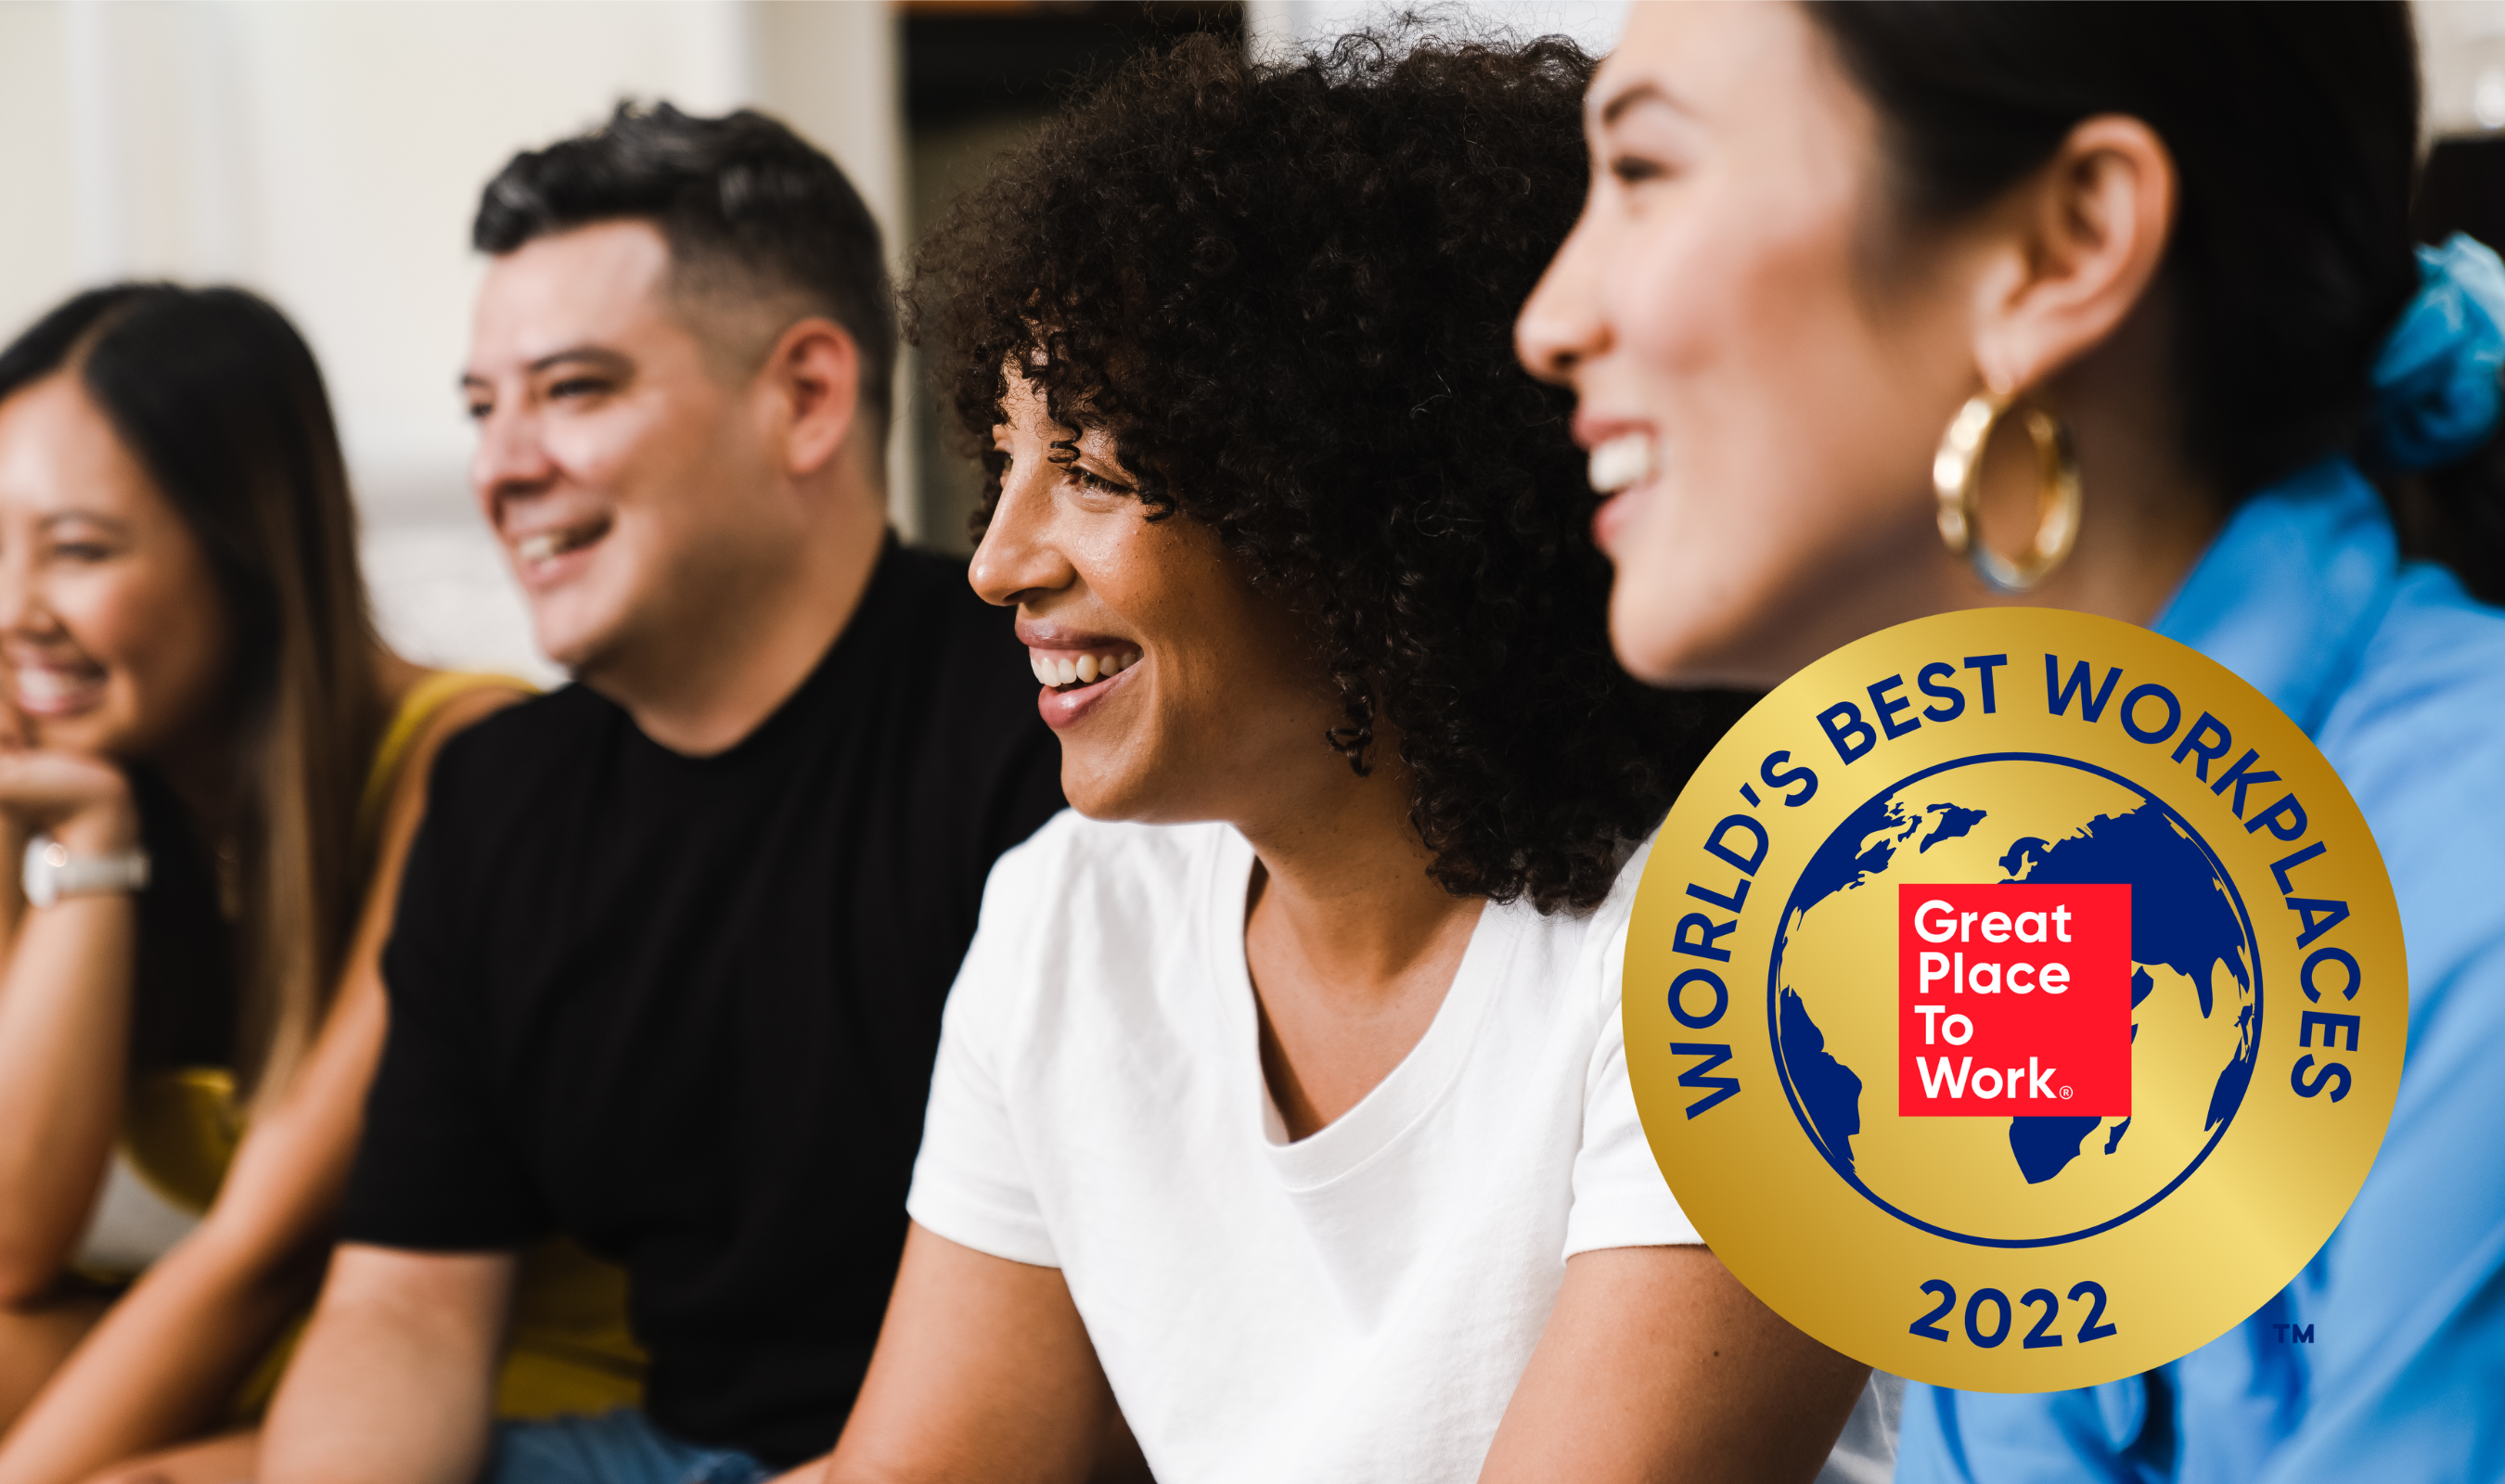 World's Best Workplaces™ 2022: 3 Key Ideas for Employee Success